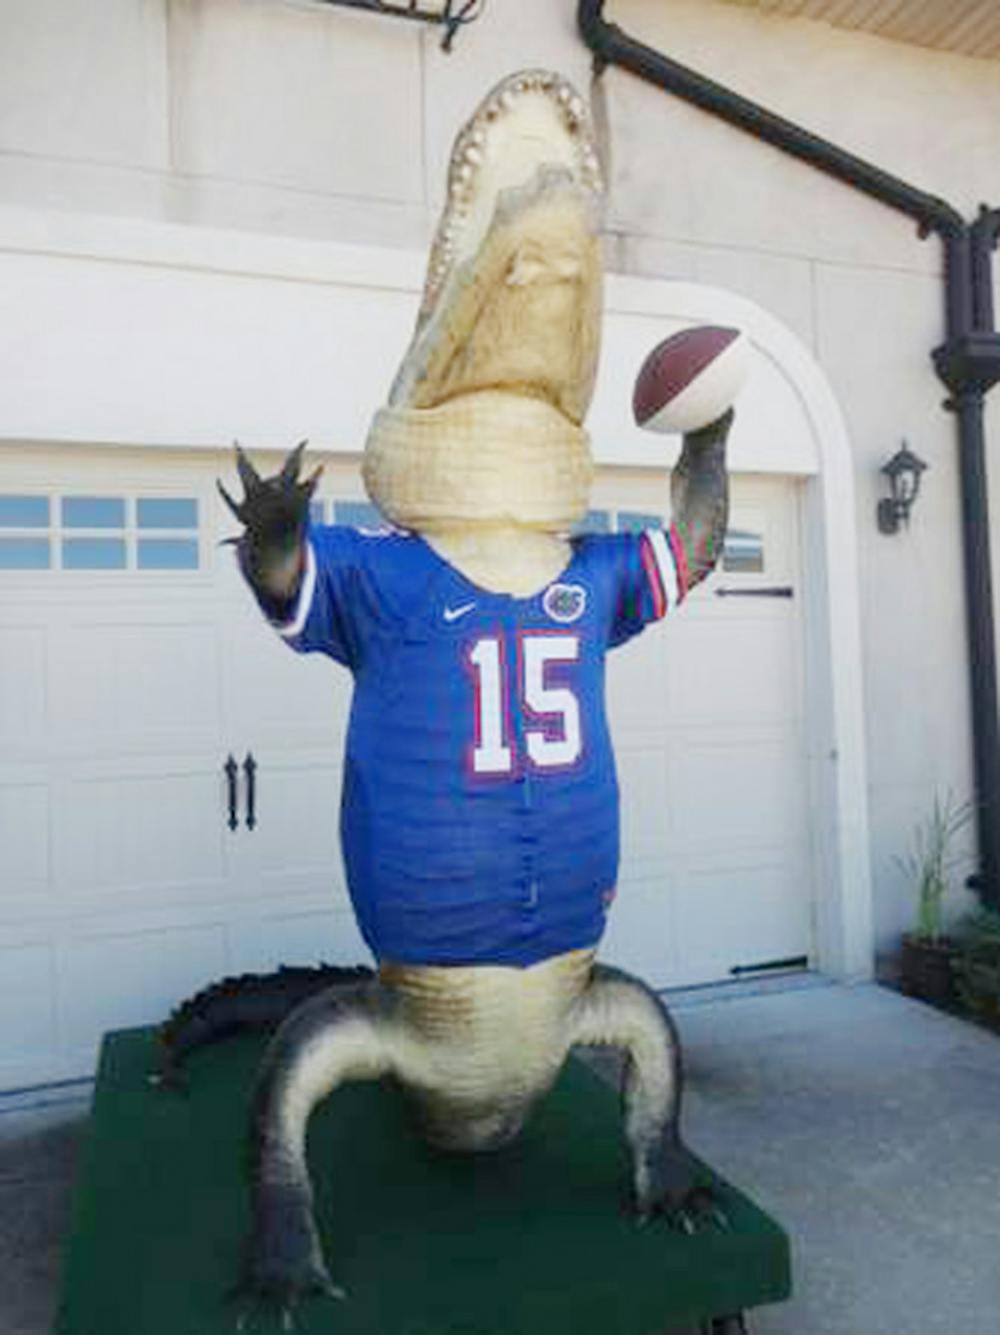 <p class="p1"><span class="s1"><span class="s1">A 13-foot-4-inch bull alligator is mounted in the Heisman Trophy pose. He holds a football signed by Tim Tebow,</span> Steve Spurrier and Danny Wuerffel.</span></p>